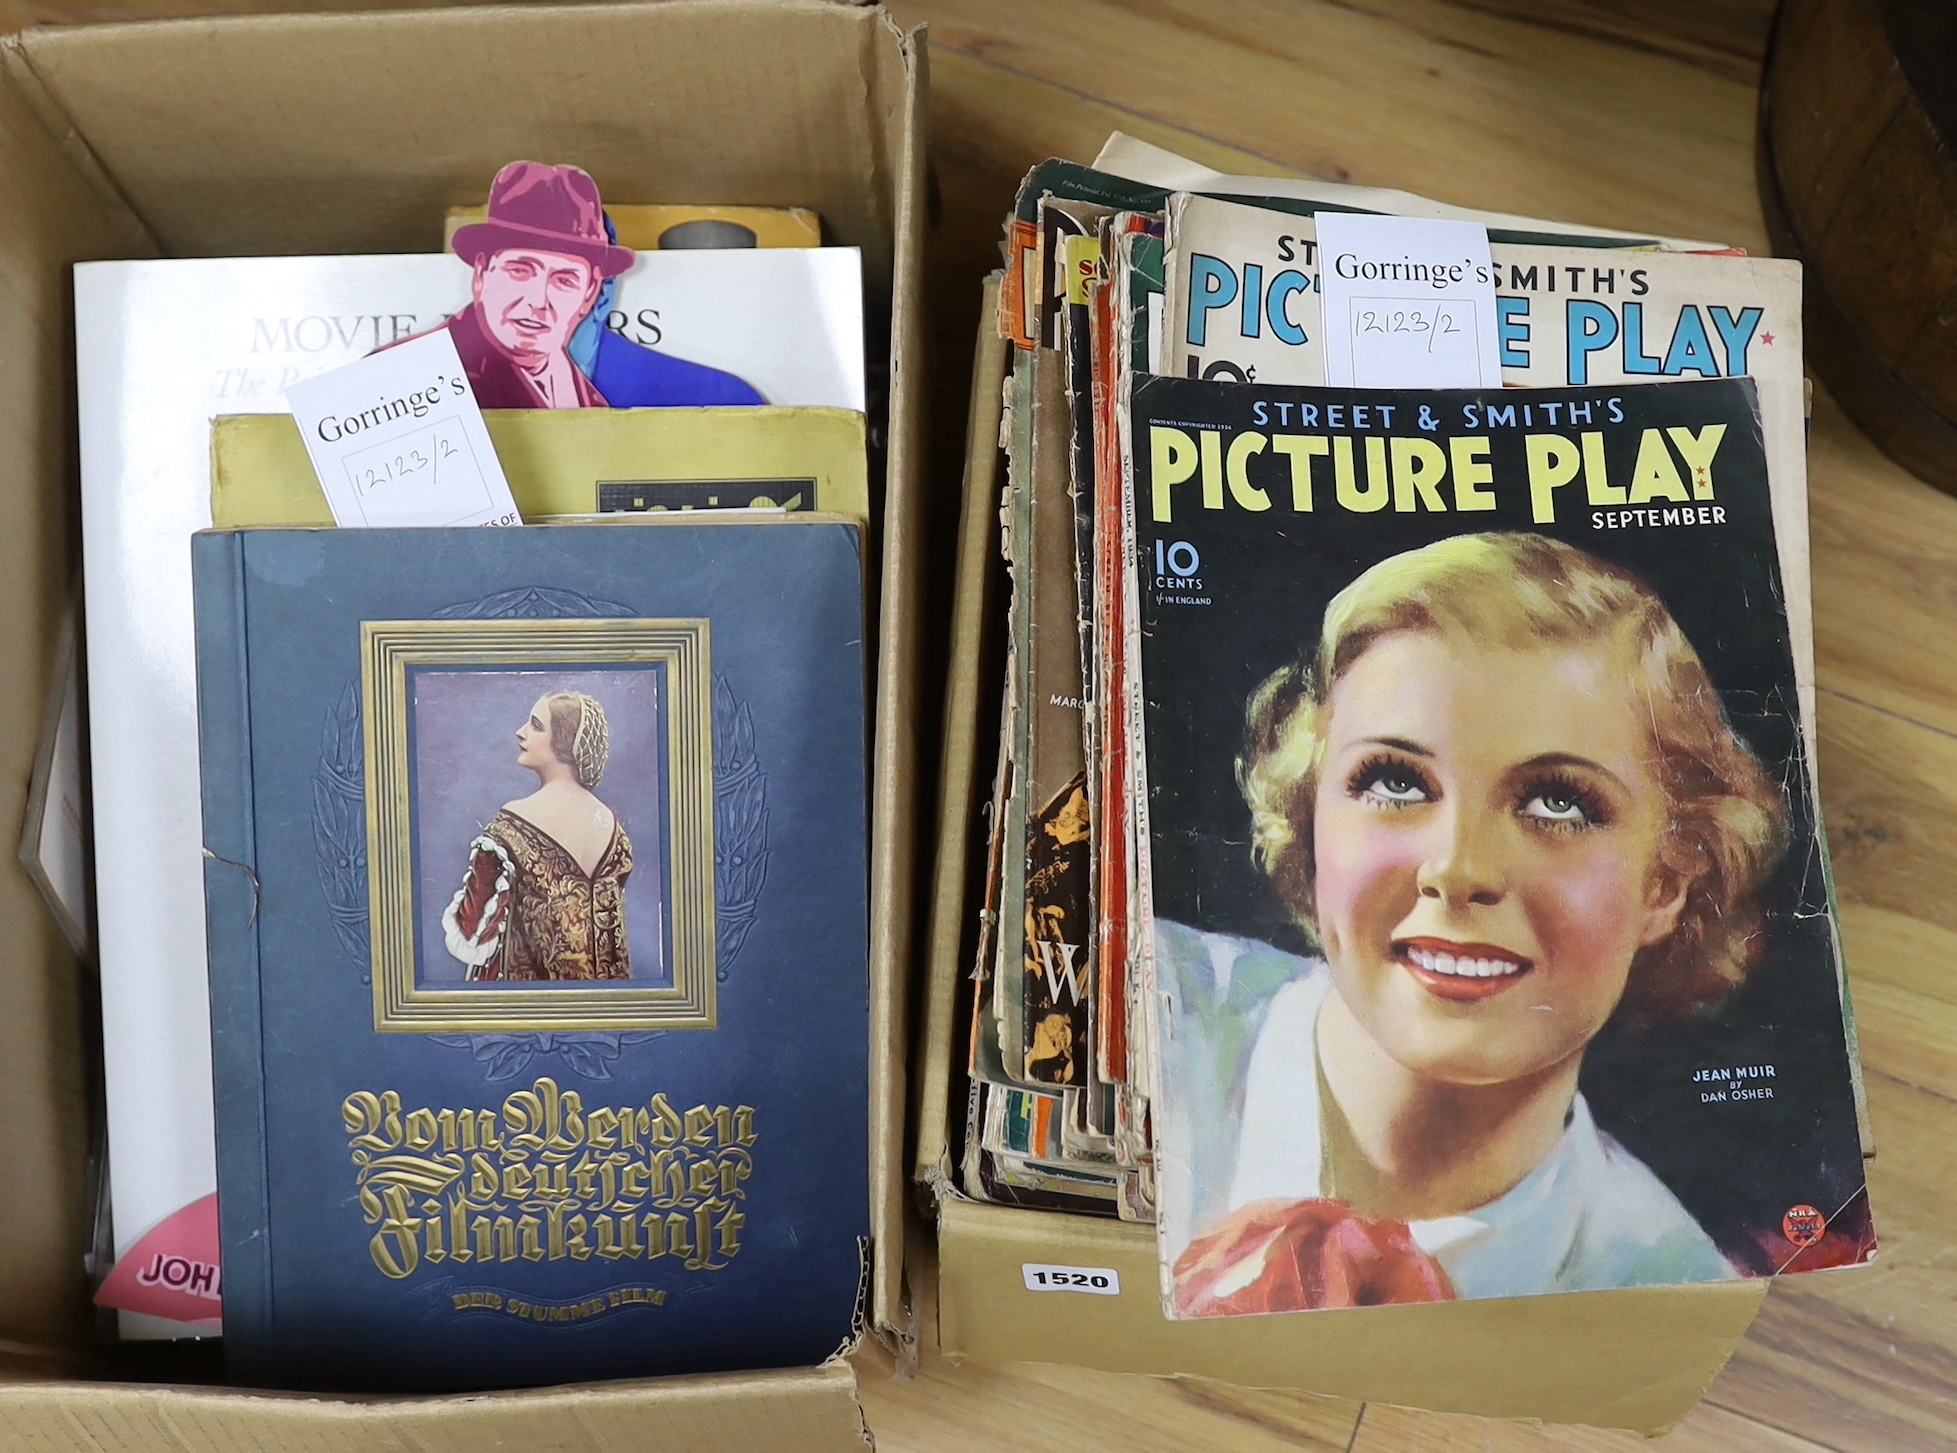 Film Magazines - include Picture Play, Motion Picture, Screen Play (etc.) illus. throughout, pictorial wrappers, 4to. inter-war period and later; together with a few items relating to W.C. Fields, and a few miscellaneous